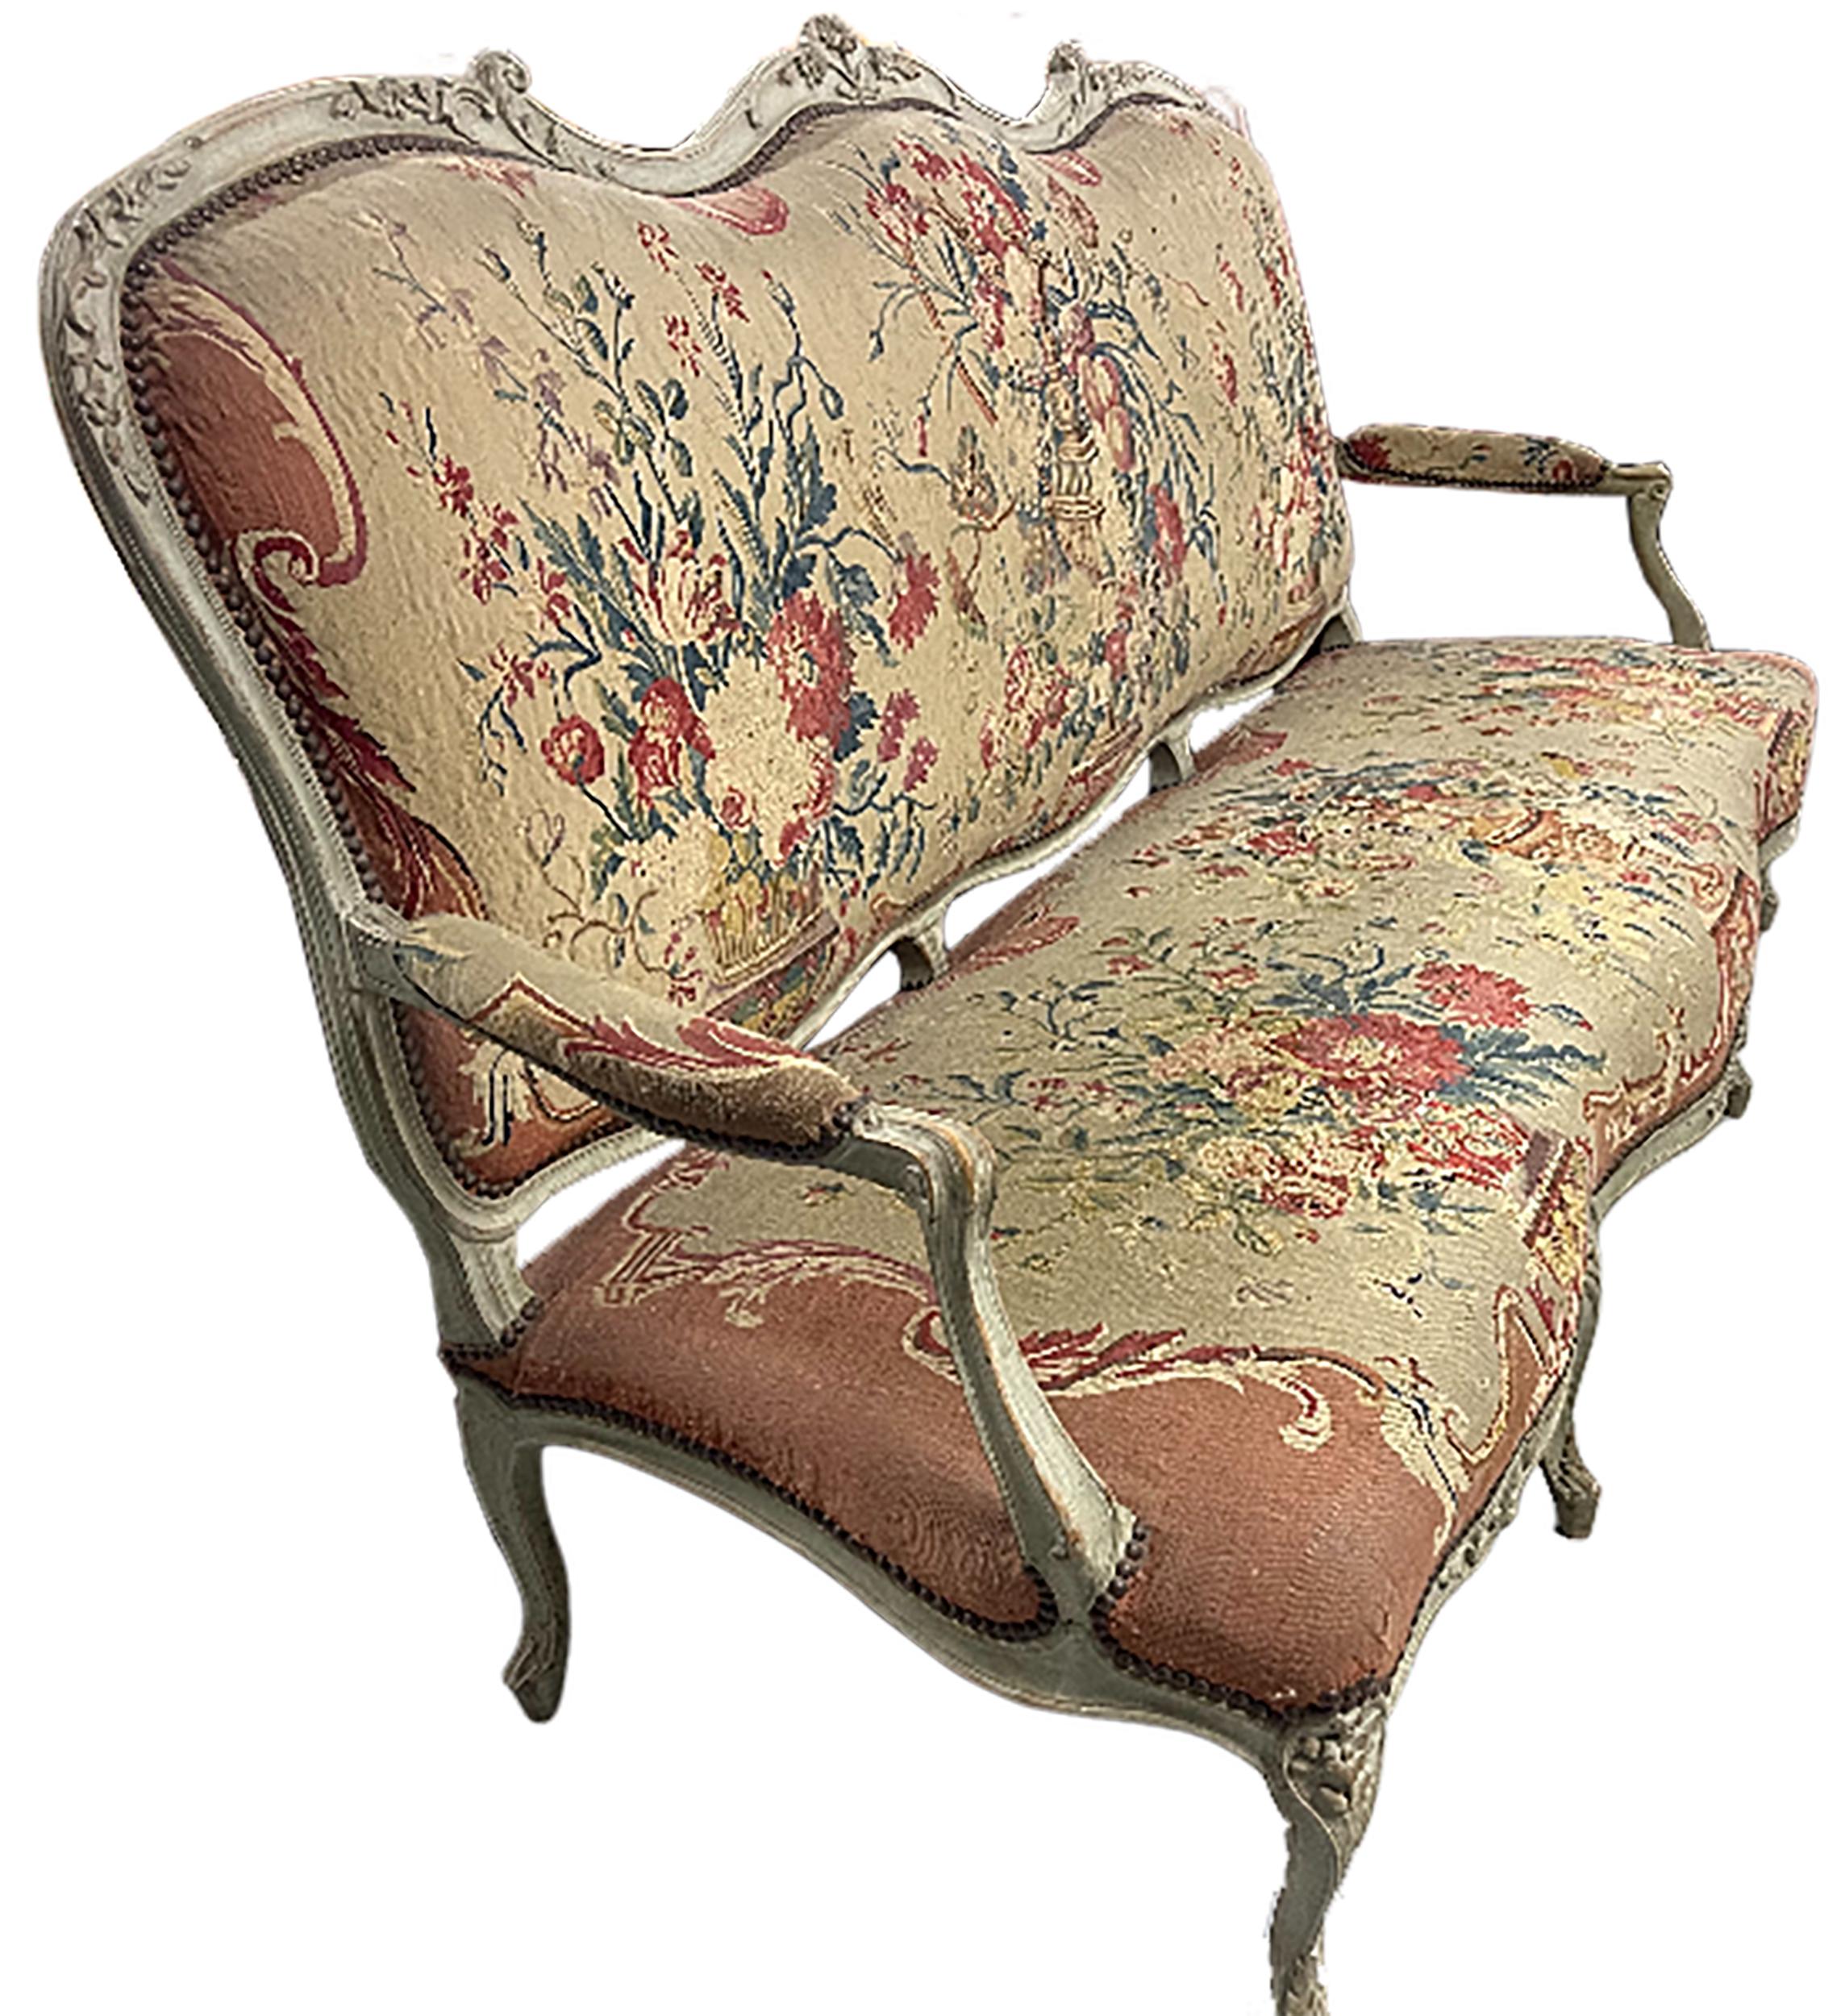 An elegant French Louis XV Style tapestry/canape settee. Amber aubusson tapestry upholstery with floral patterns. Accents of red clay colors on the edges of the upholstery. Elegantly carved and painted armrests and cabriole legs. Plaid pattern